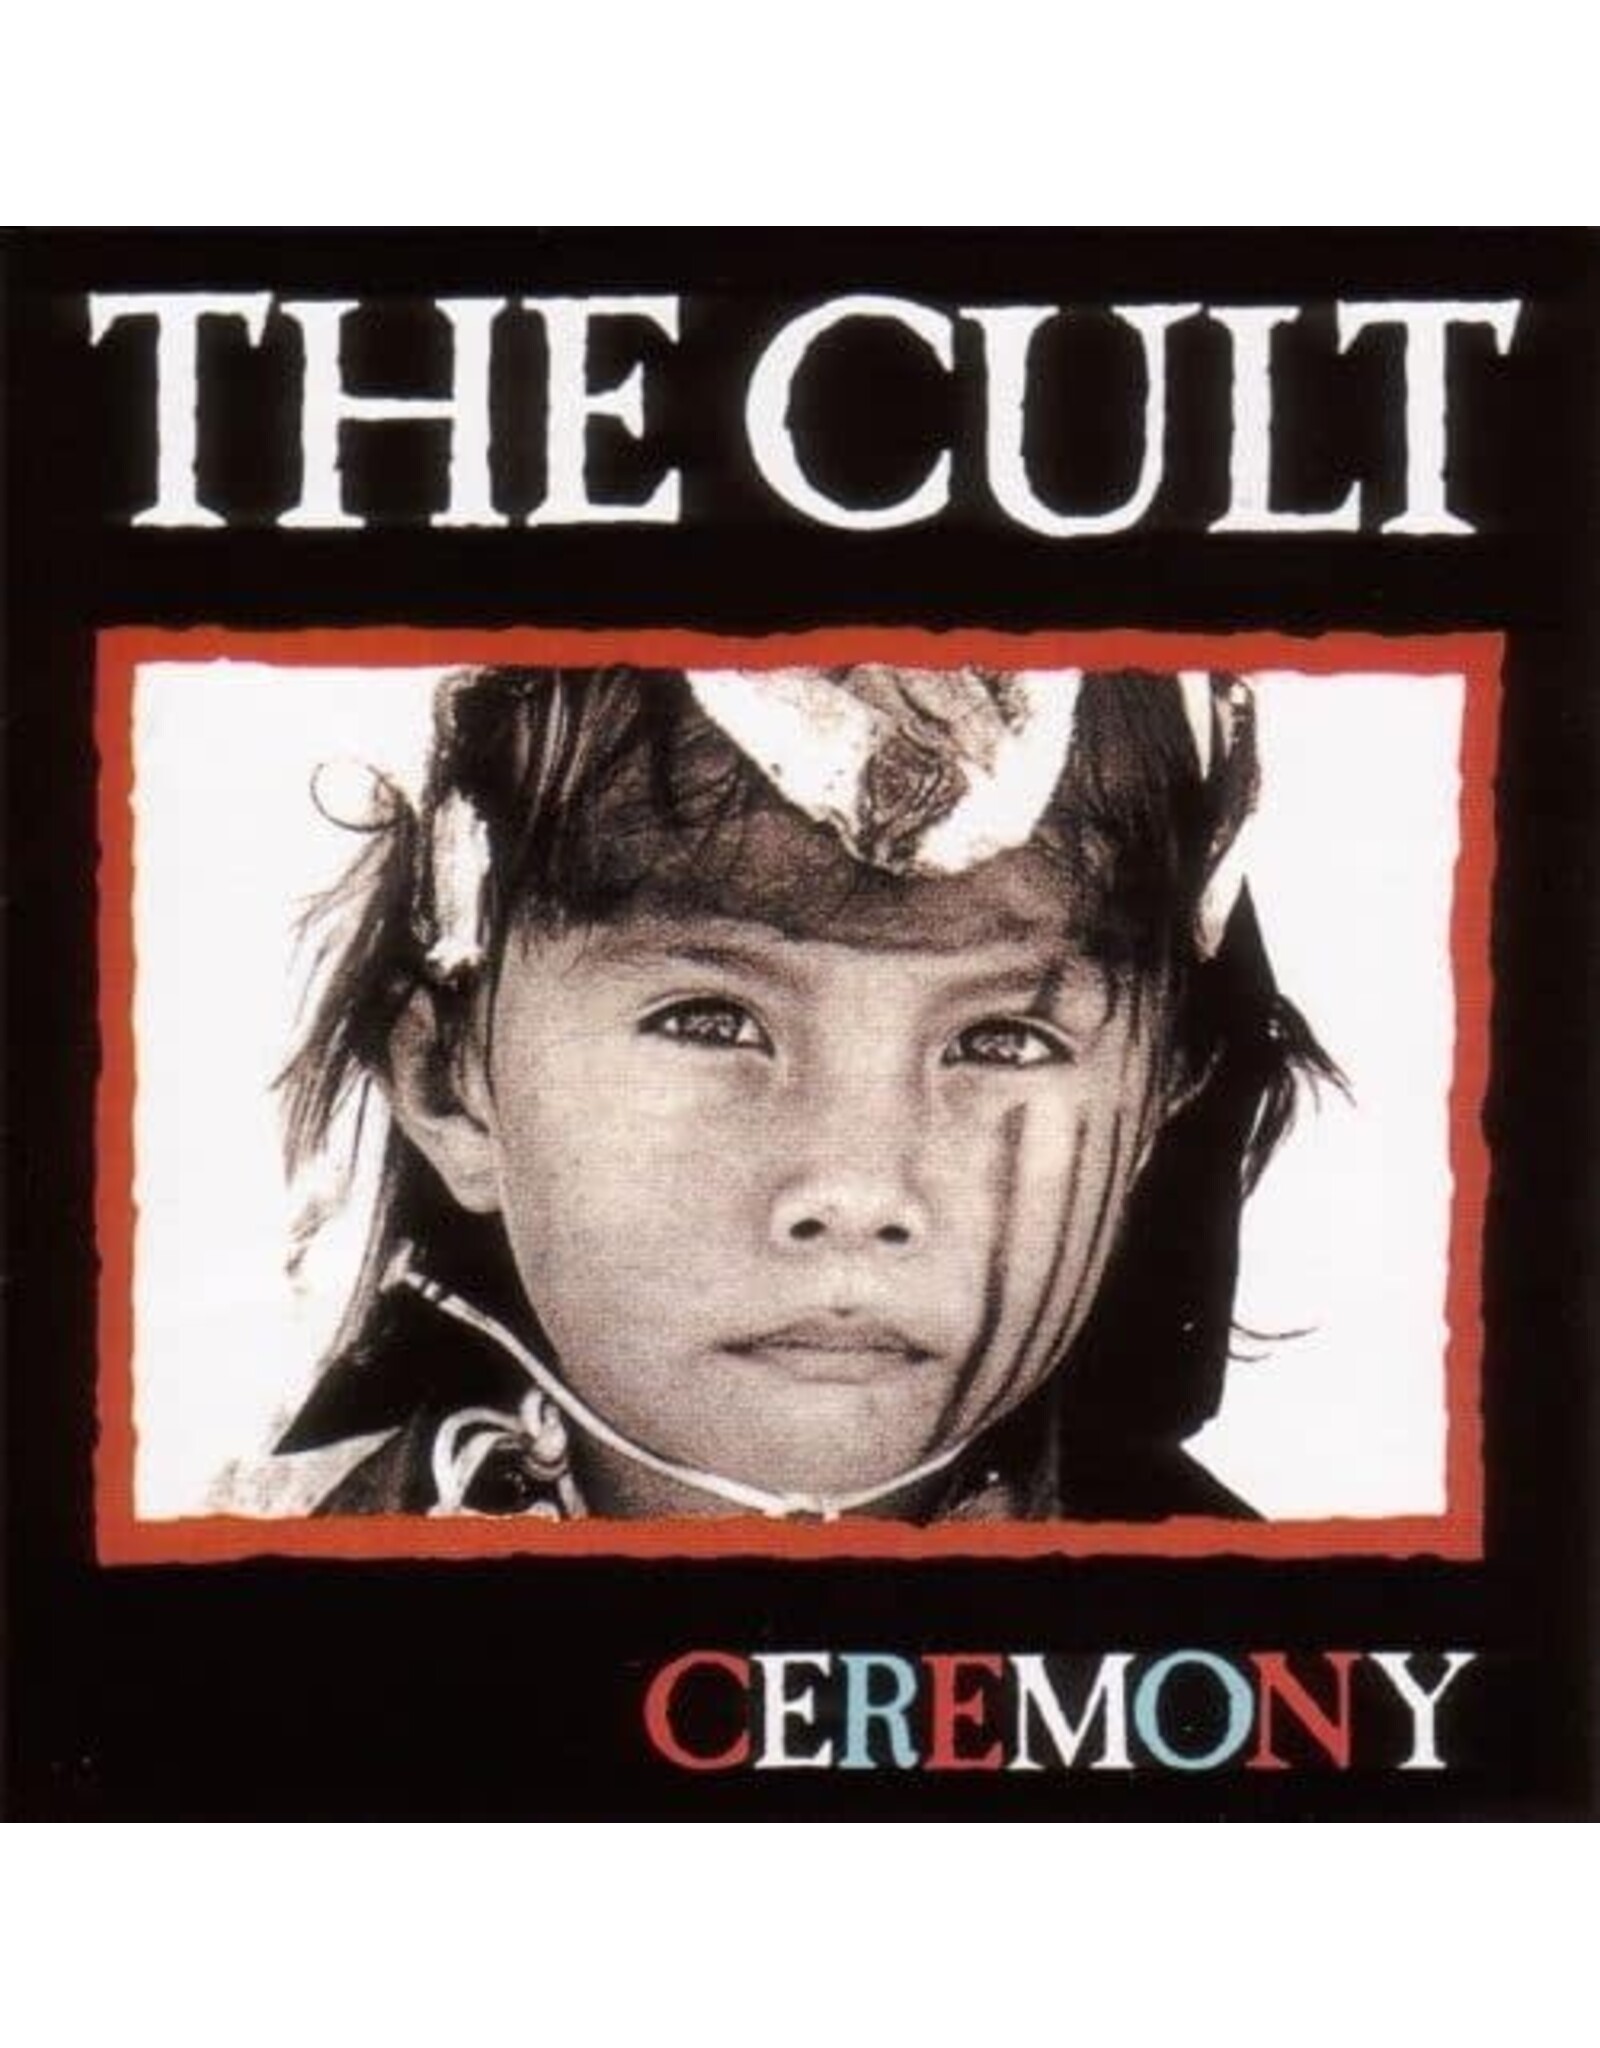 Cult, The - Ceremony (Indie Red/Blue) 2LP